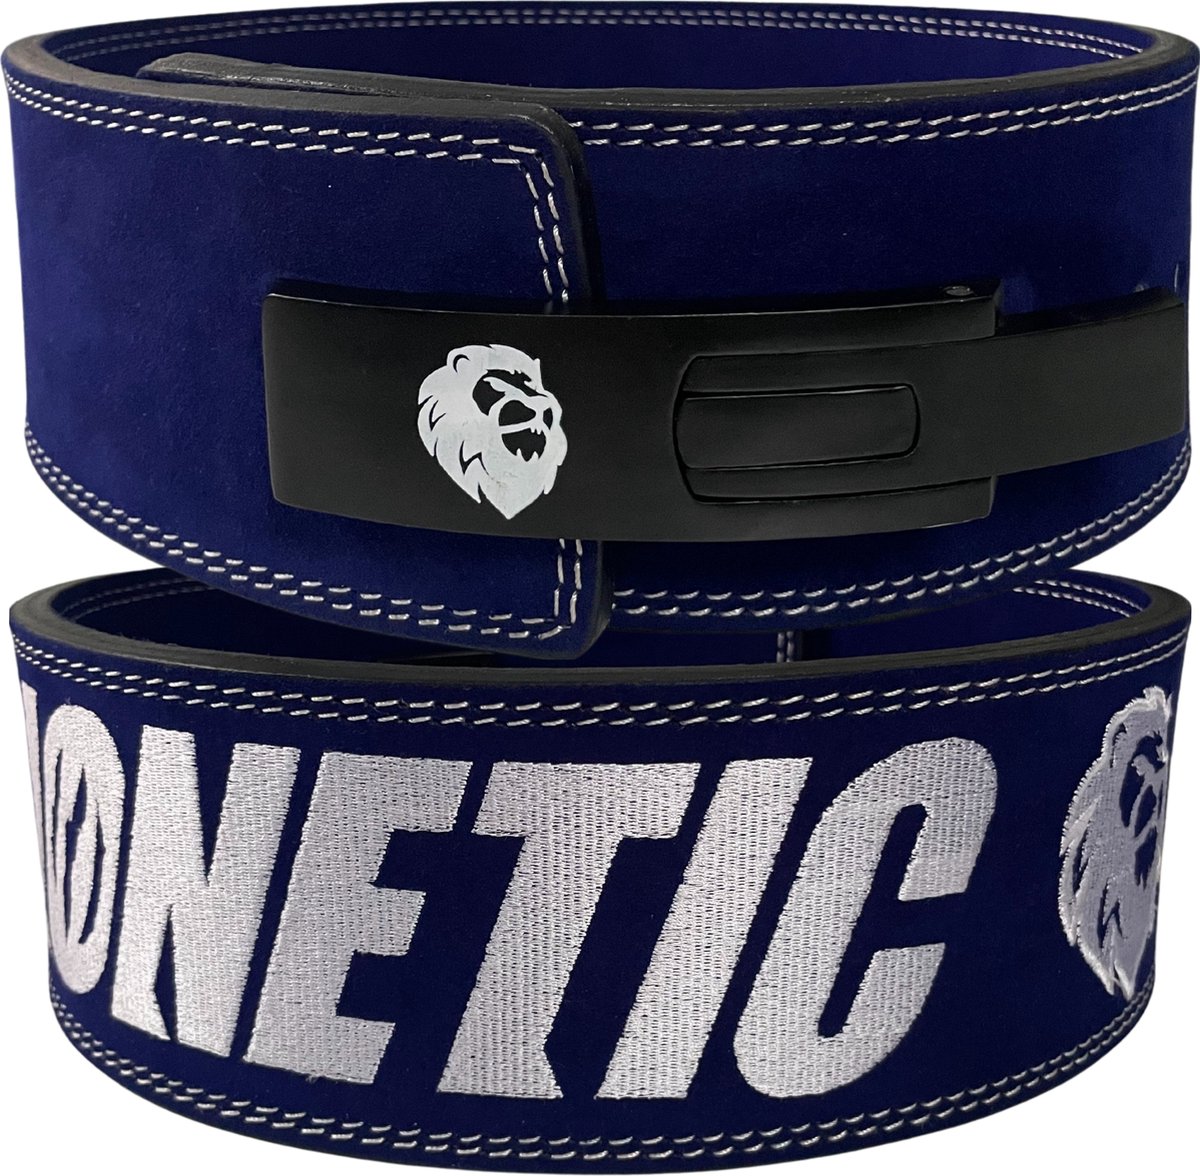 Lionetic LIMITED EDITION Powerlifting Lever Belt - Lifting Belt - Powerliftig Riem - Clip Sluiting - Lever Belt - Powerlifting/Bodybuilding - Krachttraining Accessoires - 10mm – Lionetic Essentials Midnight Blue – XS